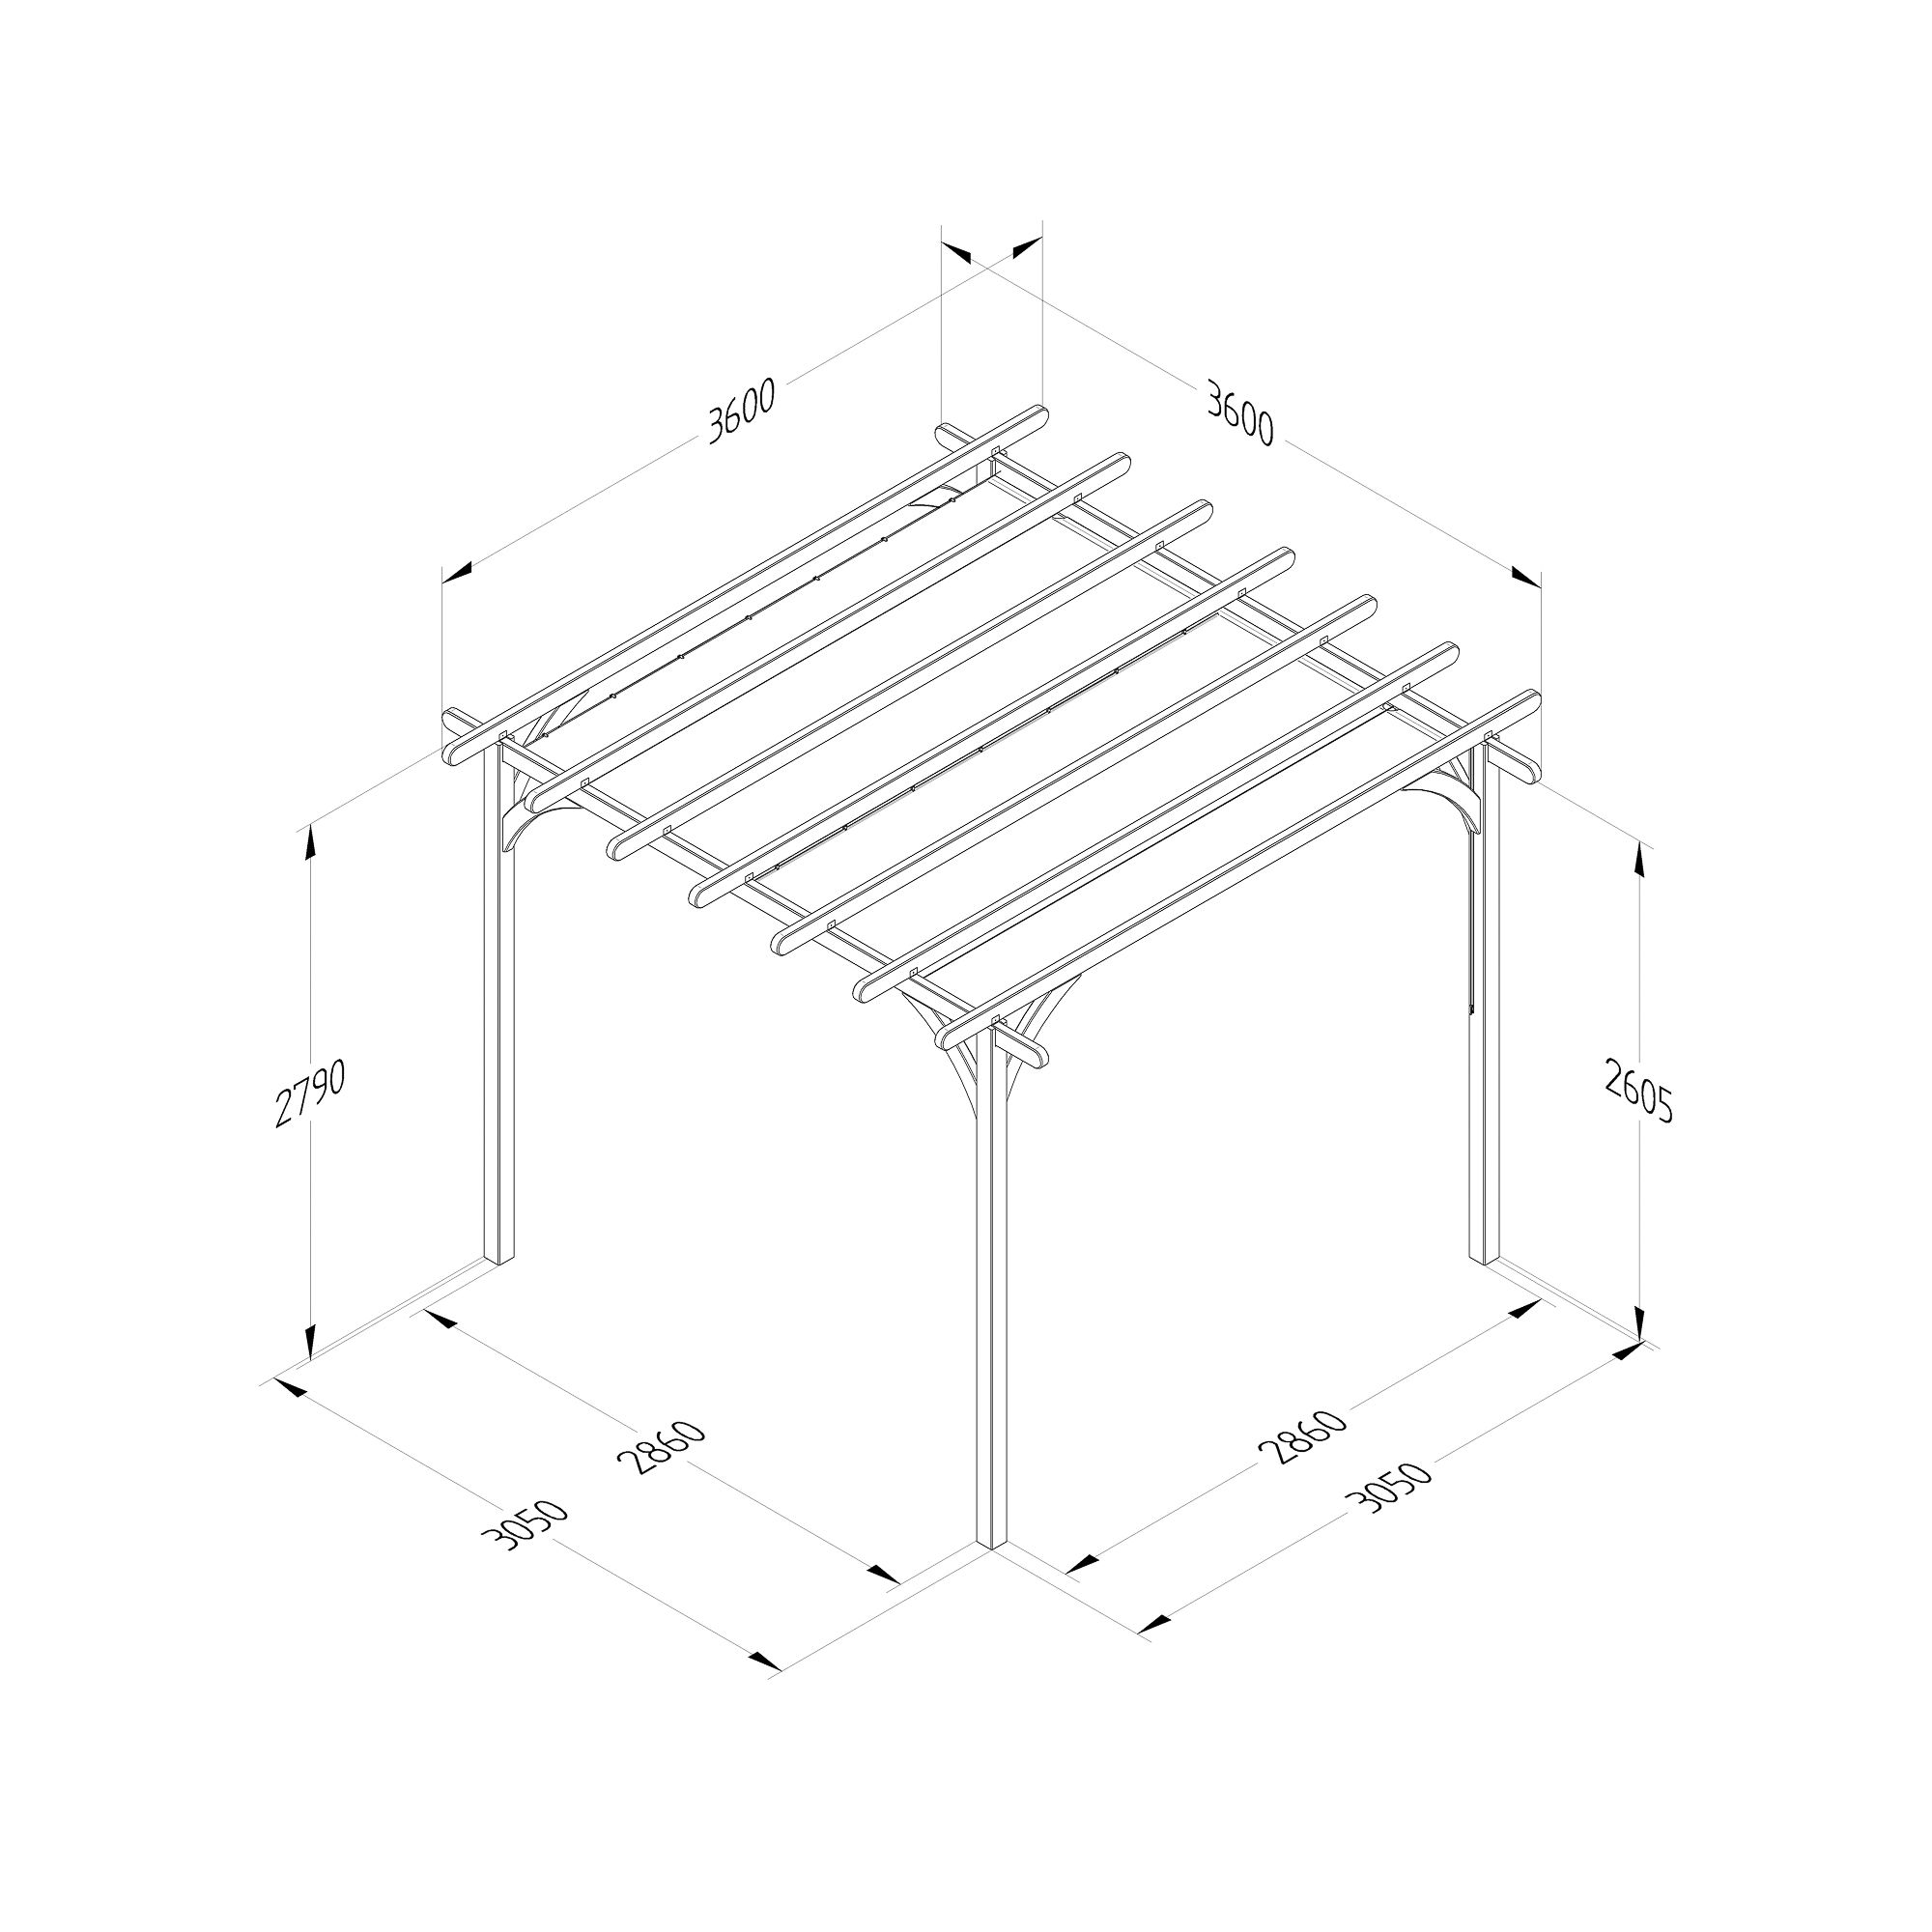 Forest Garden Ultima Cream Pergola & decking kit, x4 Post (H) 2.7m x (W) 3.6m - Canopy included